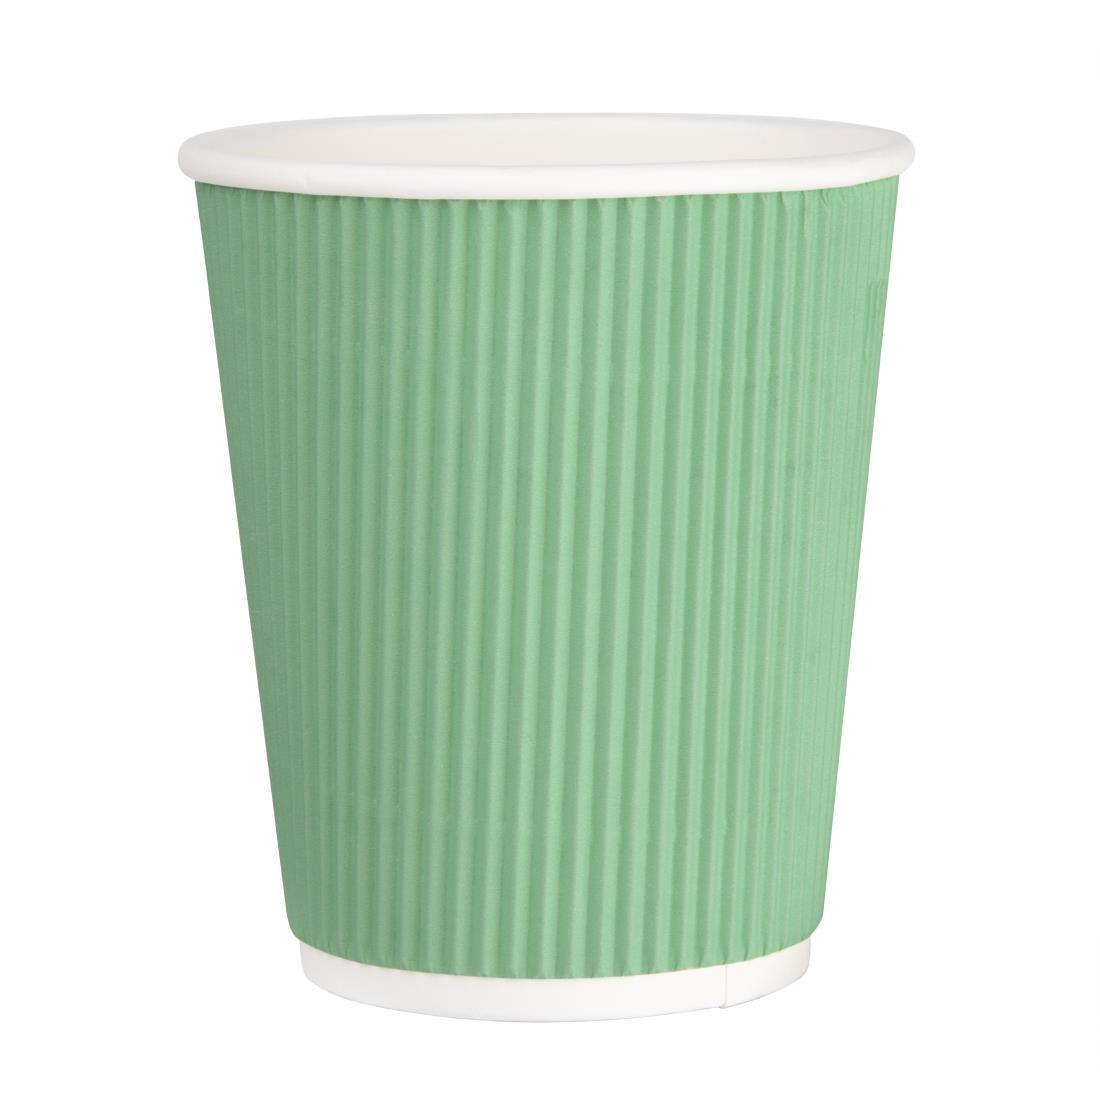 Fiesta Recyclable Coffee Cups Ripple Wall Turquoise 225ml / 8oz (Pack of 500) - GP421  - 1